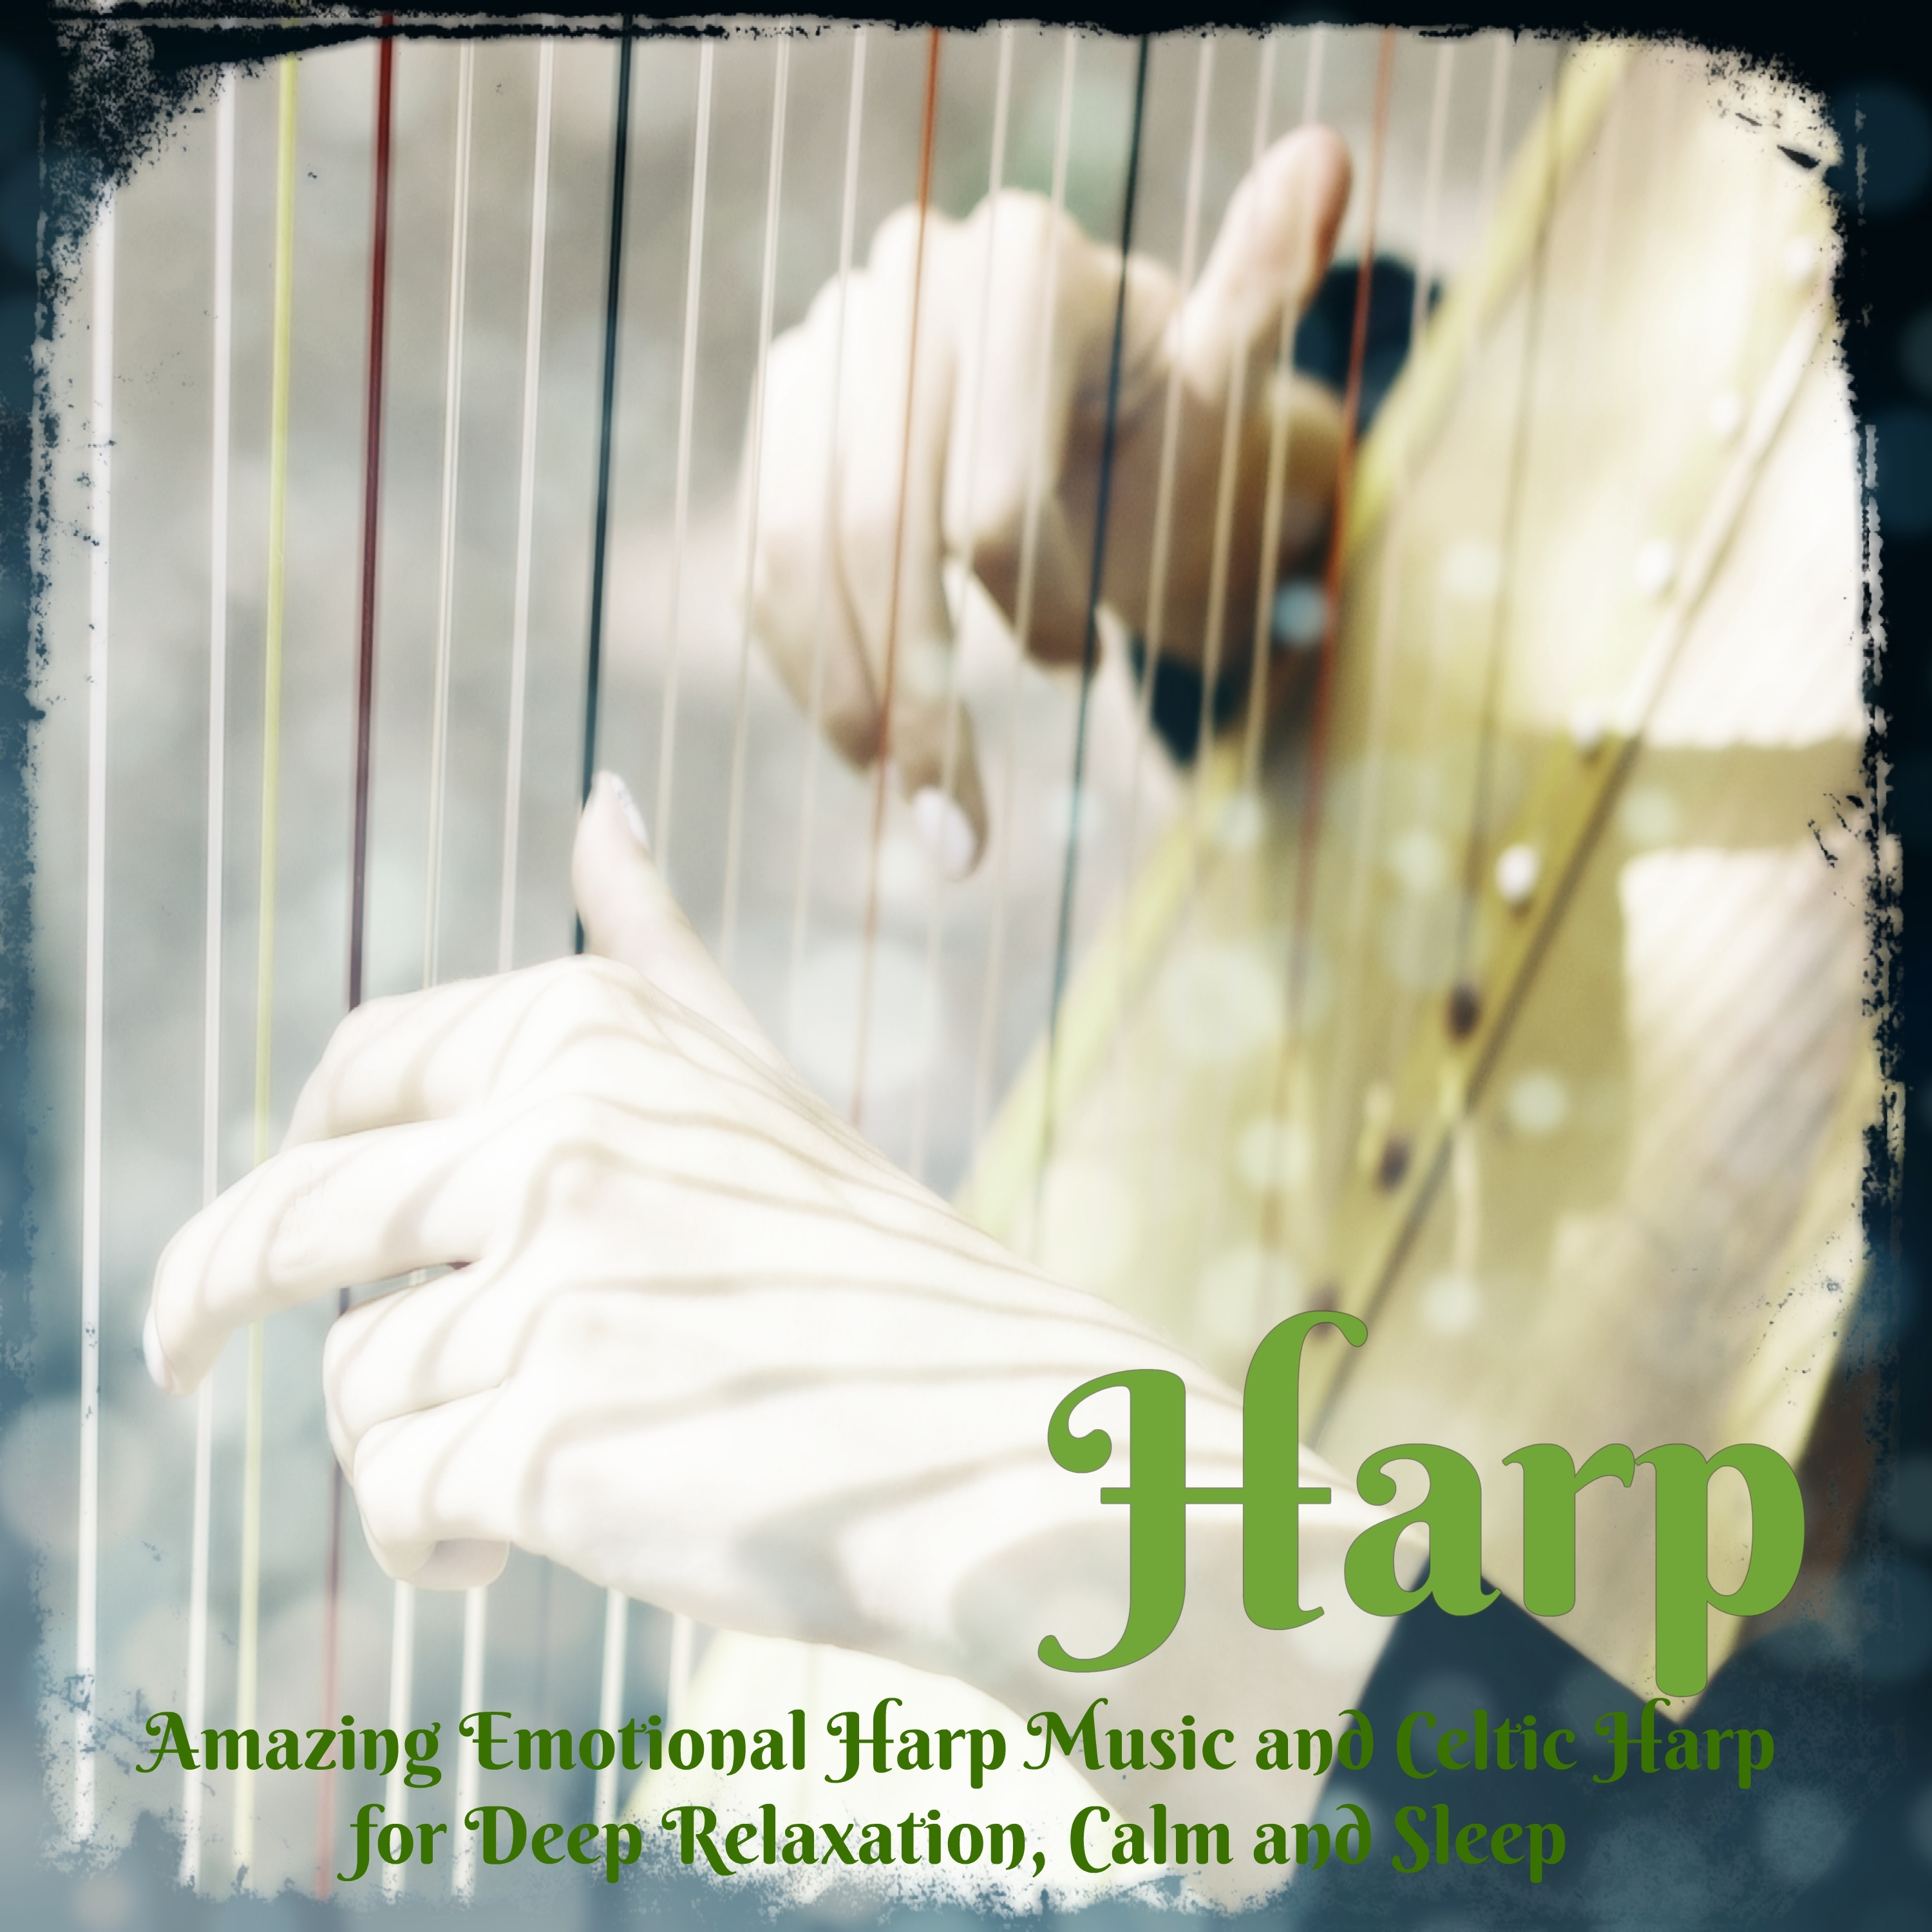 Harp – Amazing Emotional Harp Music and Celtic Harp for Deep Relaxation, Calm and Sleep